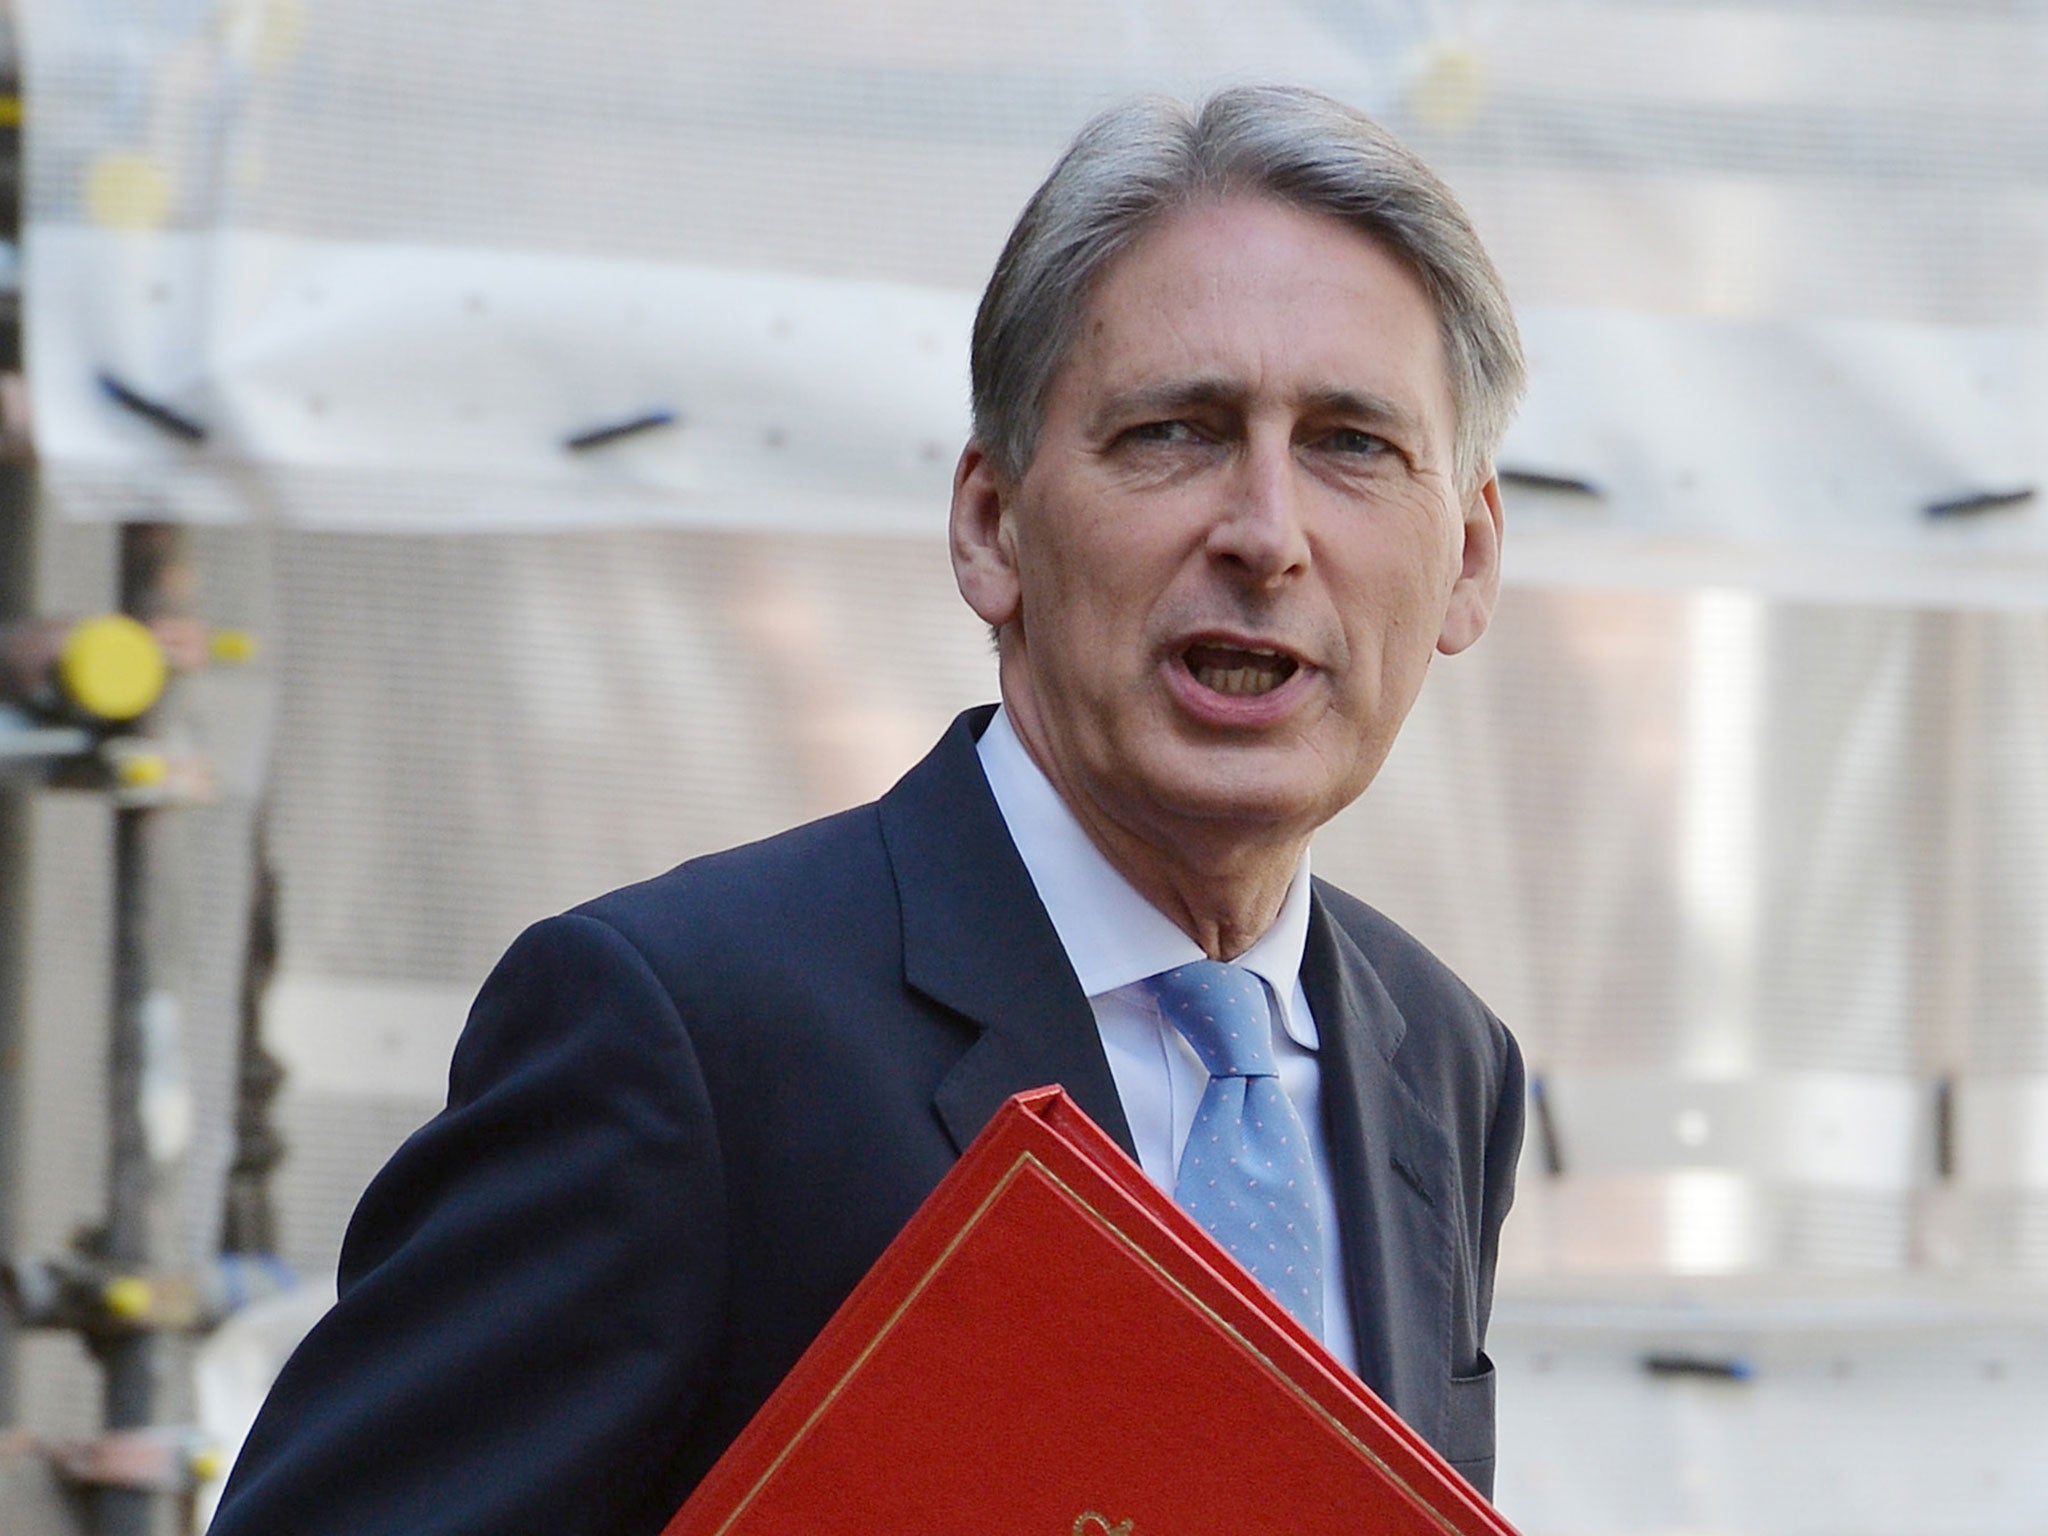 Philip Hammond said his thoughts were with the family of the murdered British man